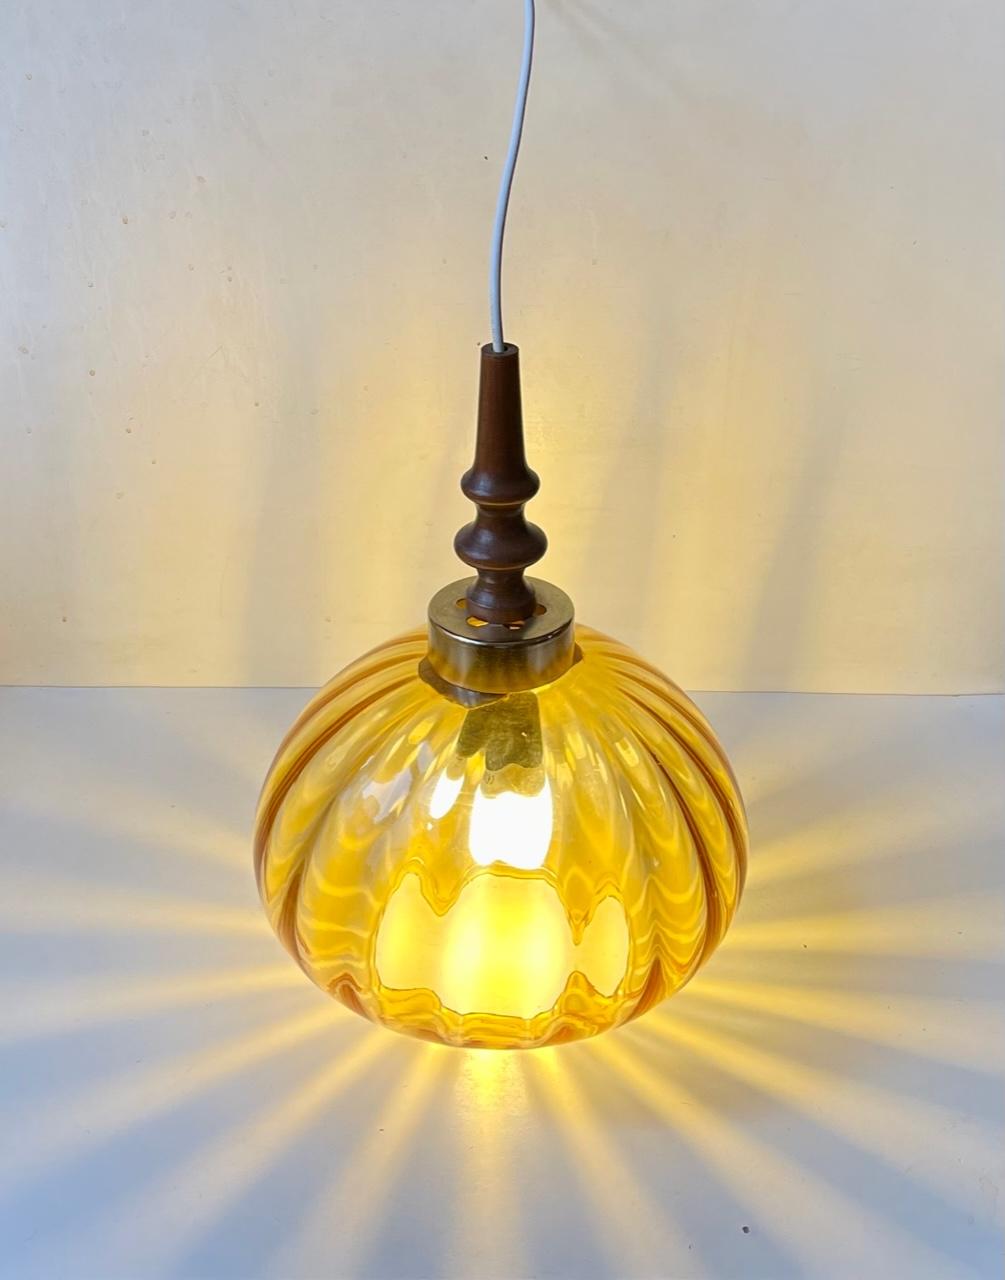 Onion shaped hand-blown hanging light in honey colored optically striped glass. It features a sculptural top in lacquered cherry and perforated brass. Unknown Swedish maker / design in the style of Carl Fagerlund and Orrefors. Measurements: height: